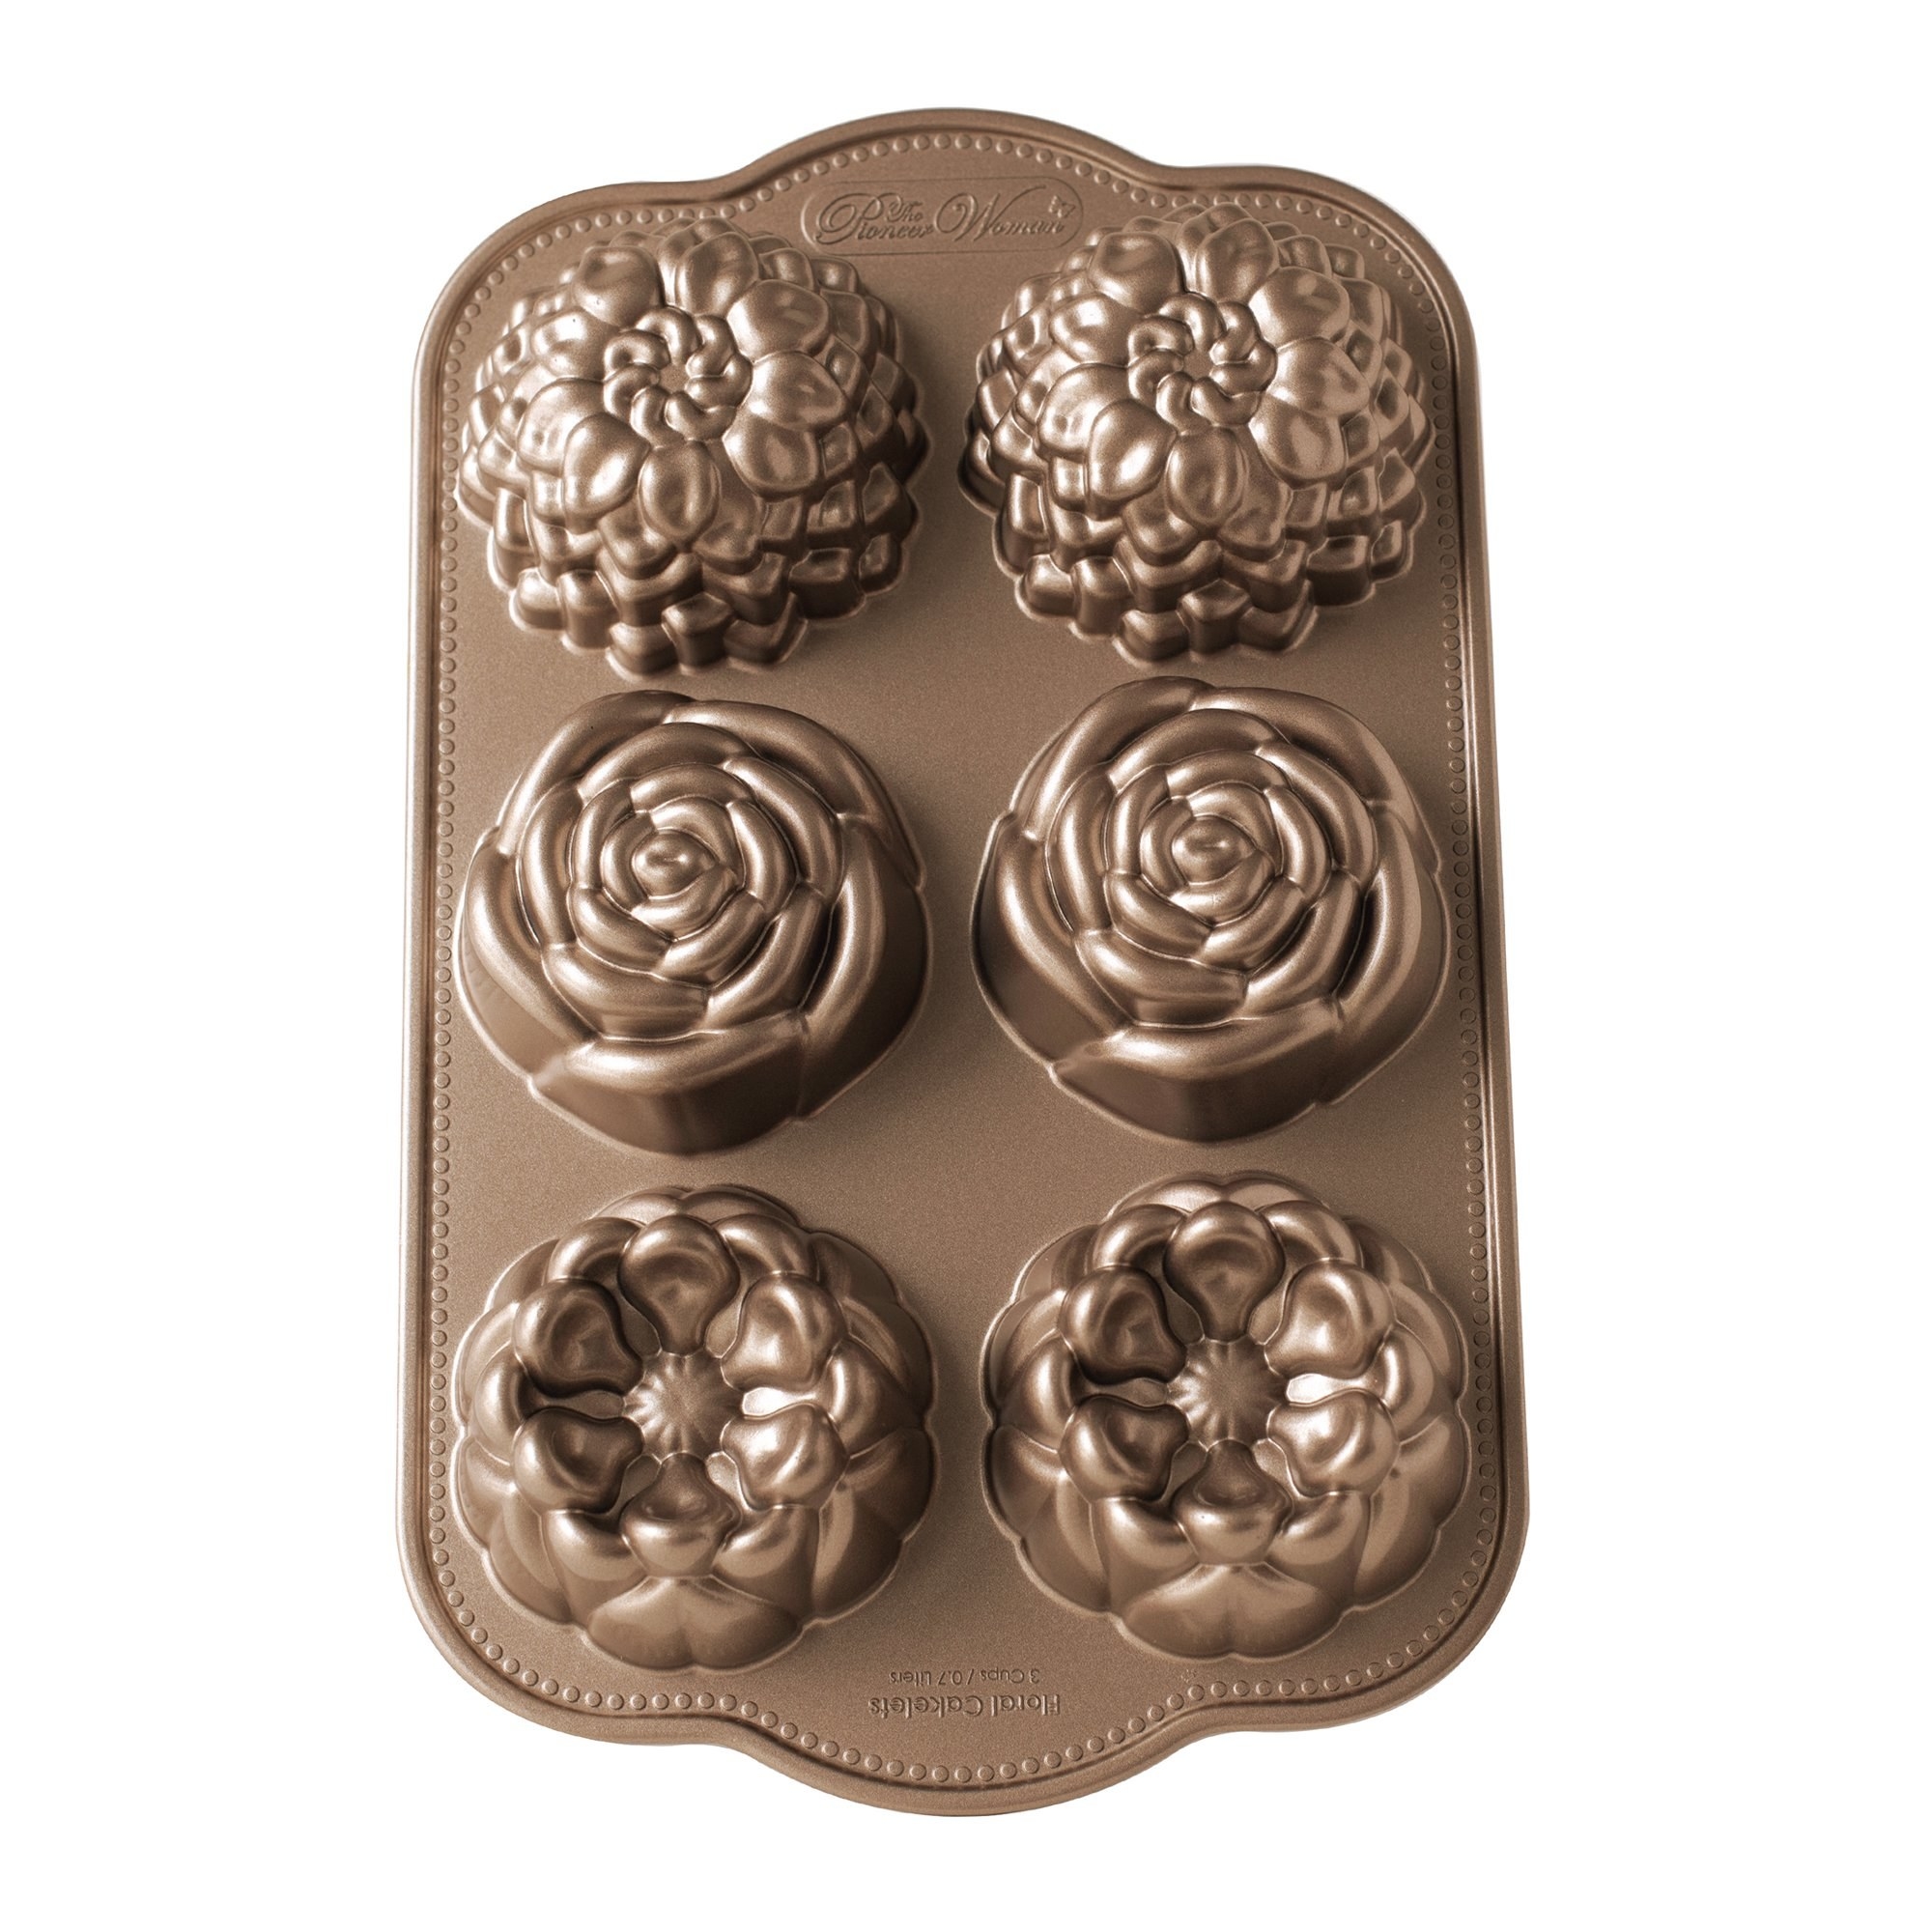 A bronze cake pan with six floral molds